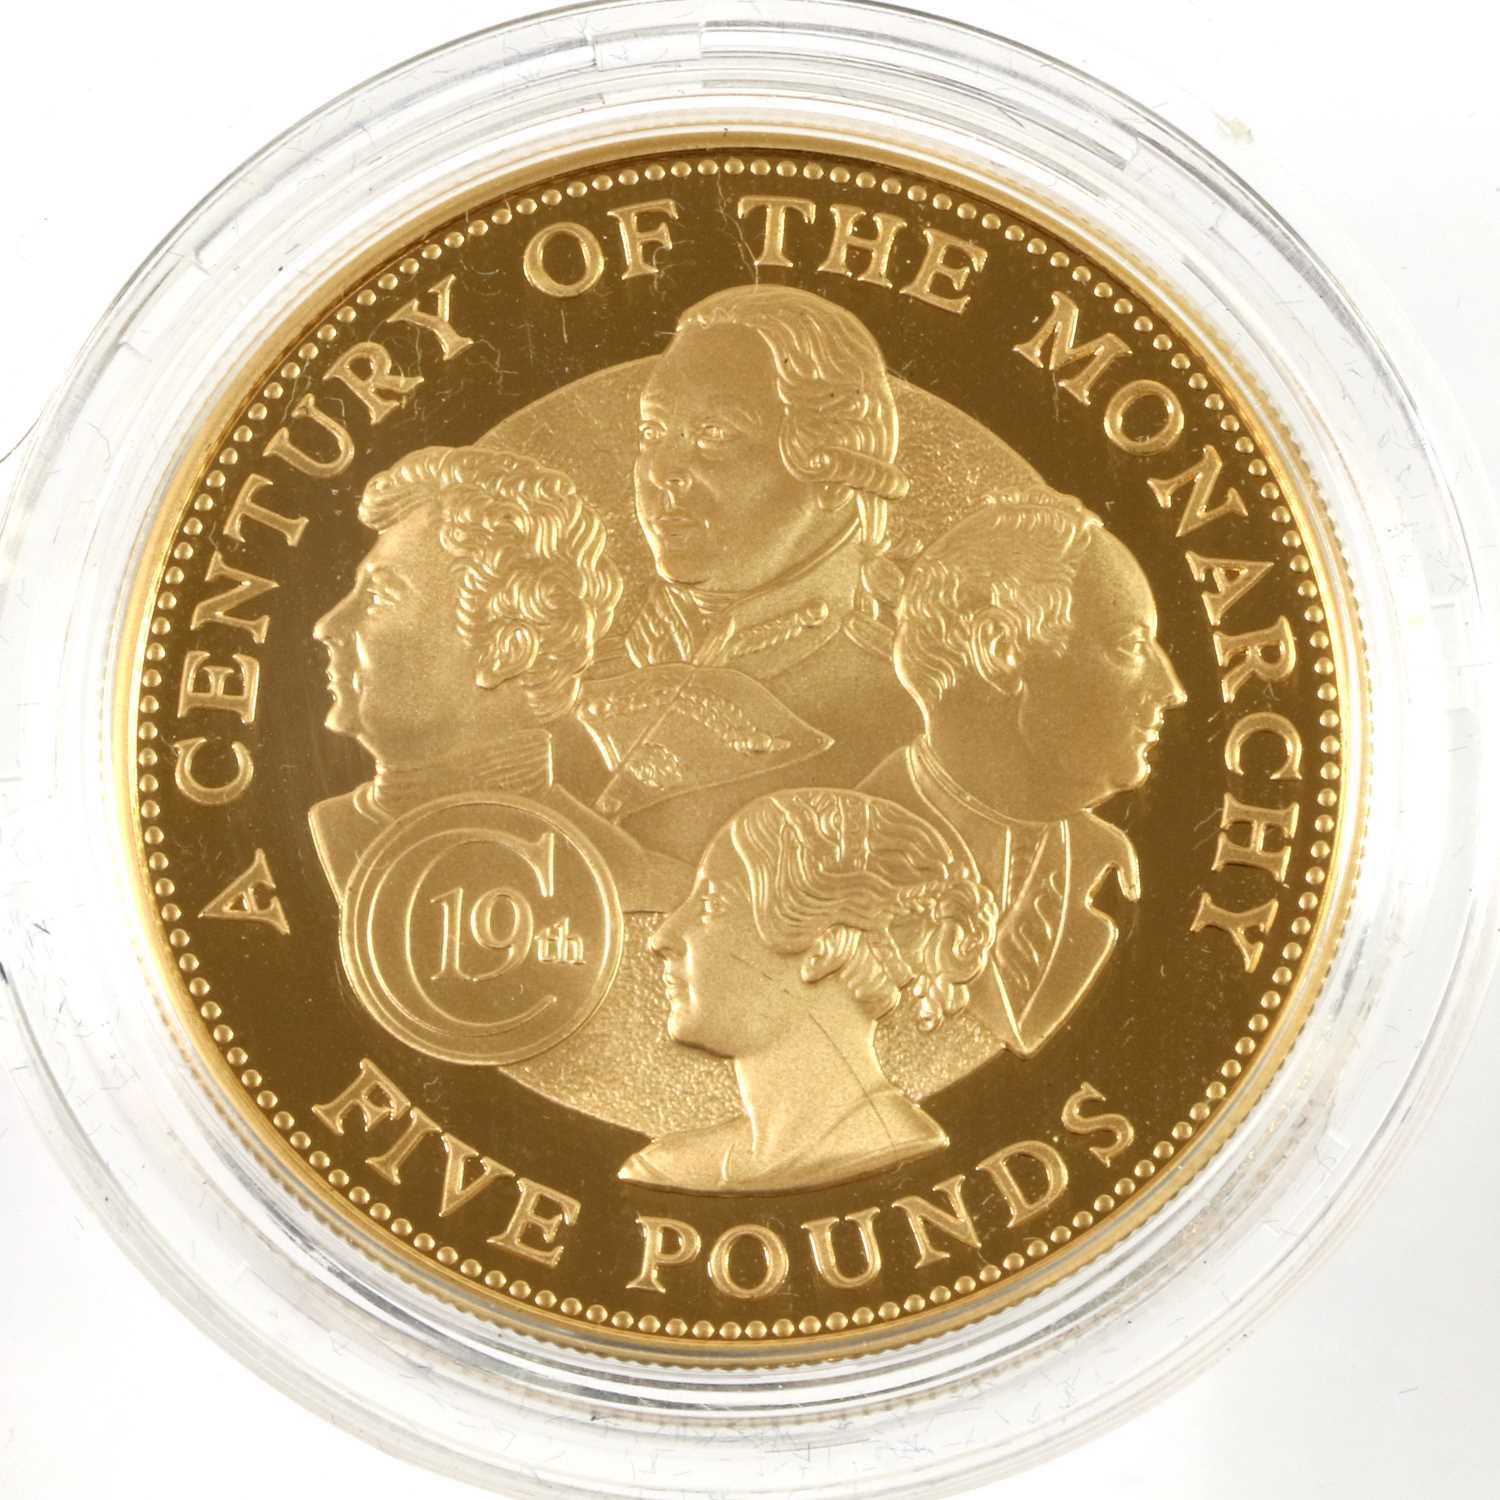 Guernsey, Gold Proof £5 2001 (.916 gold, 38.761mm, 39.94g), 'The Monarchs of the 19th Century', - Image 2 of 3